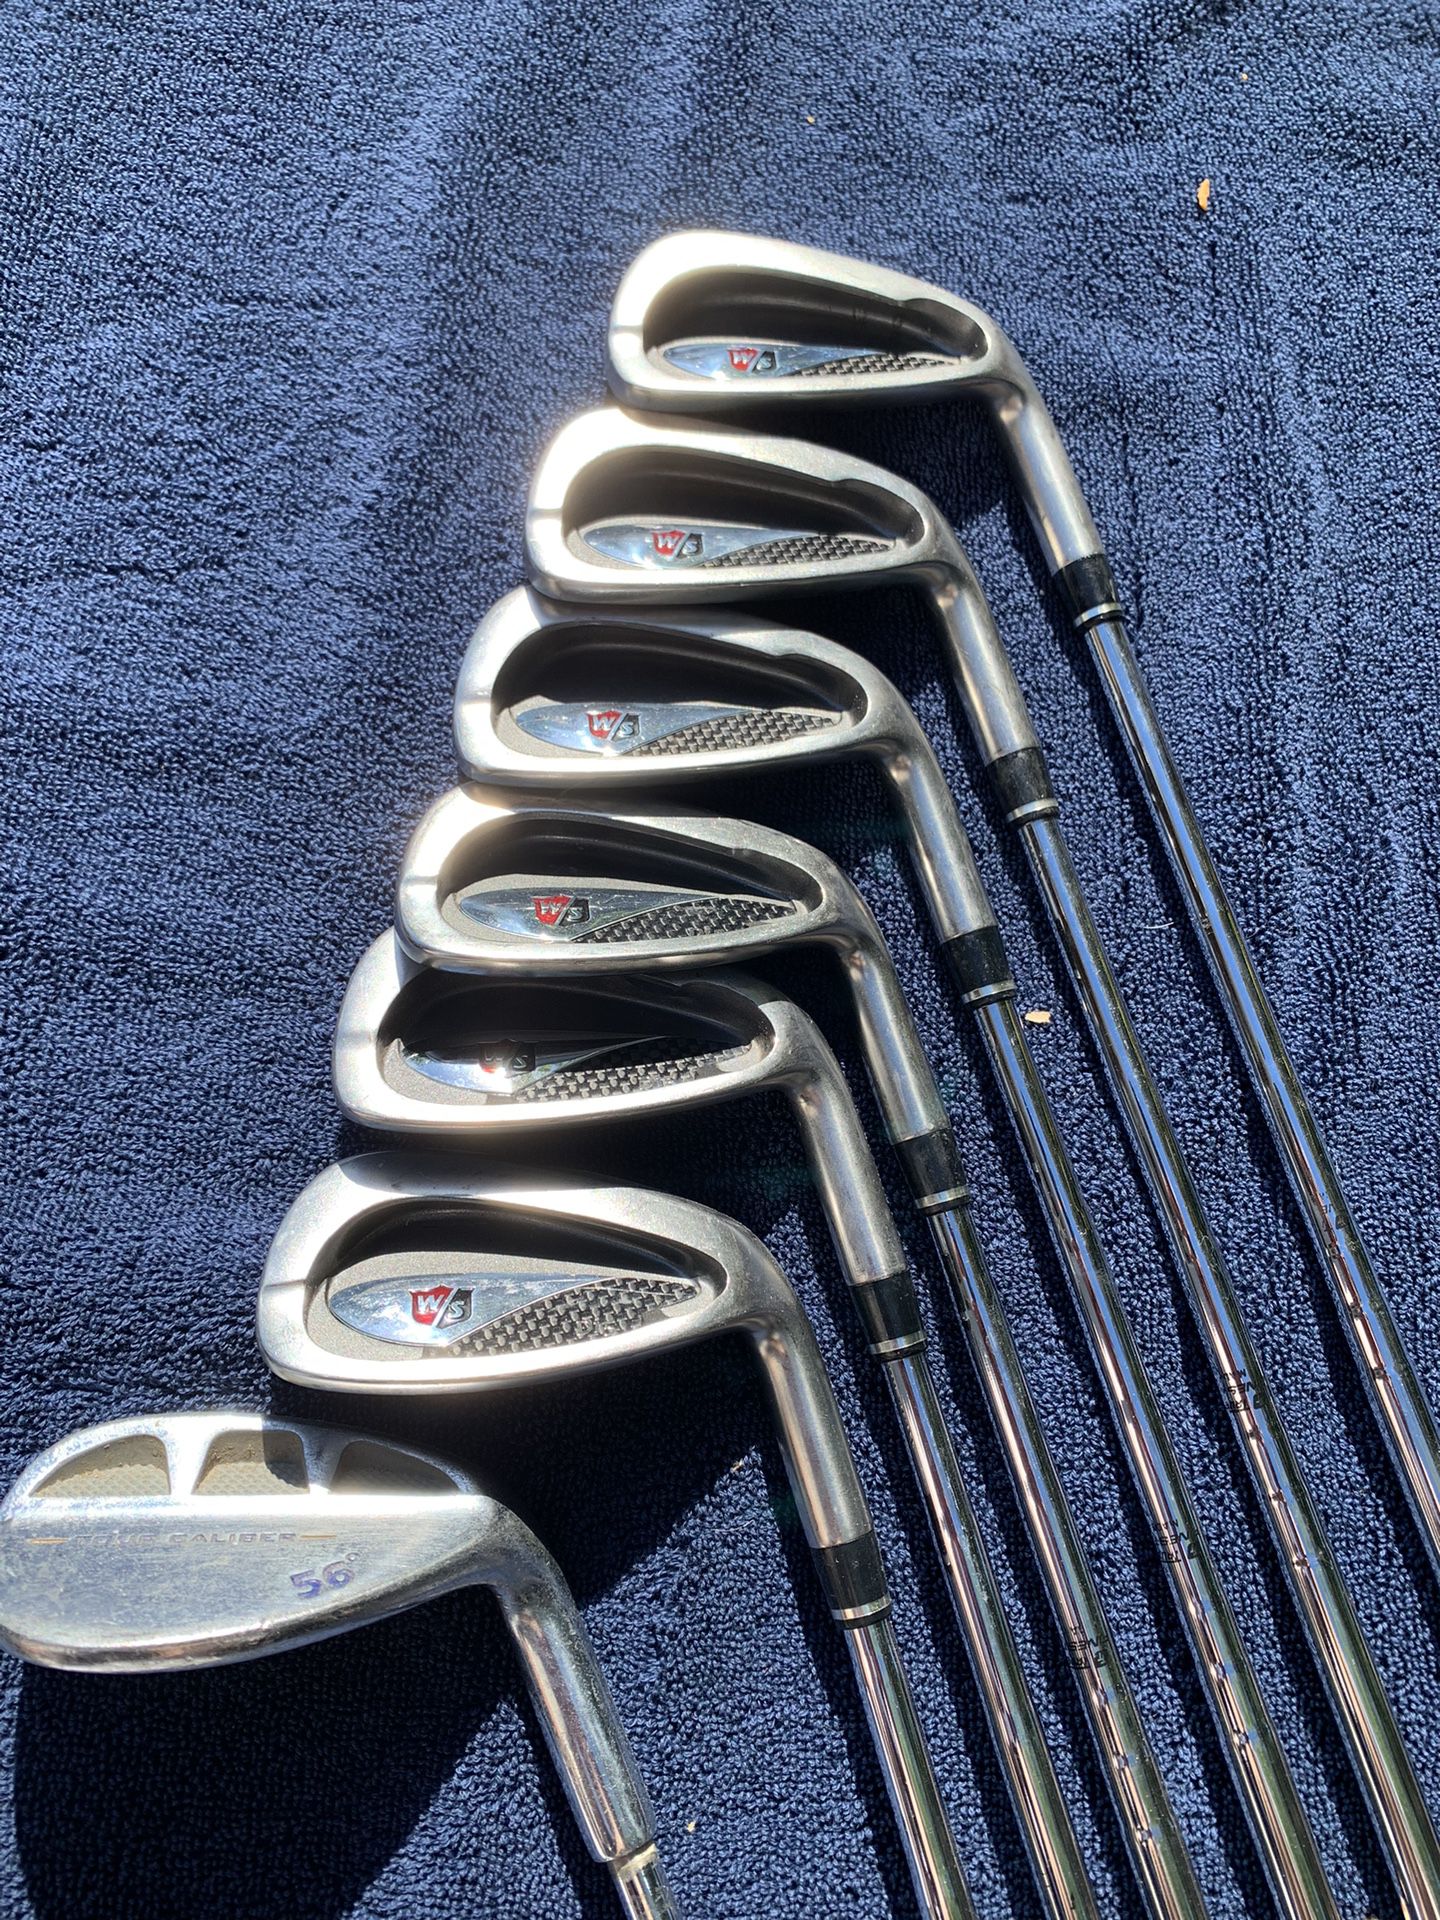 Wilson Di5 Irons With Woods And Sand wedge